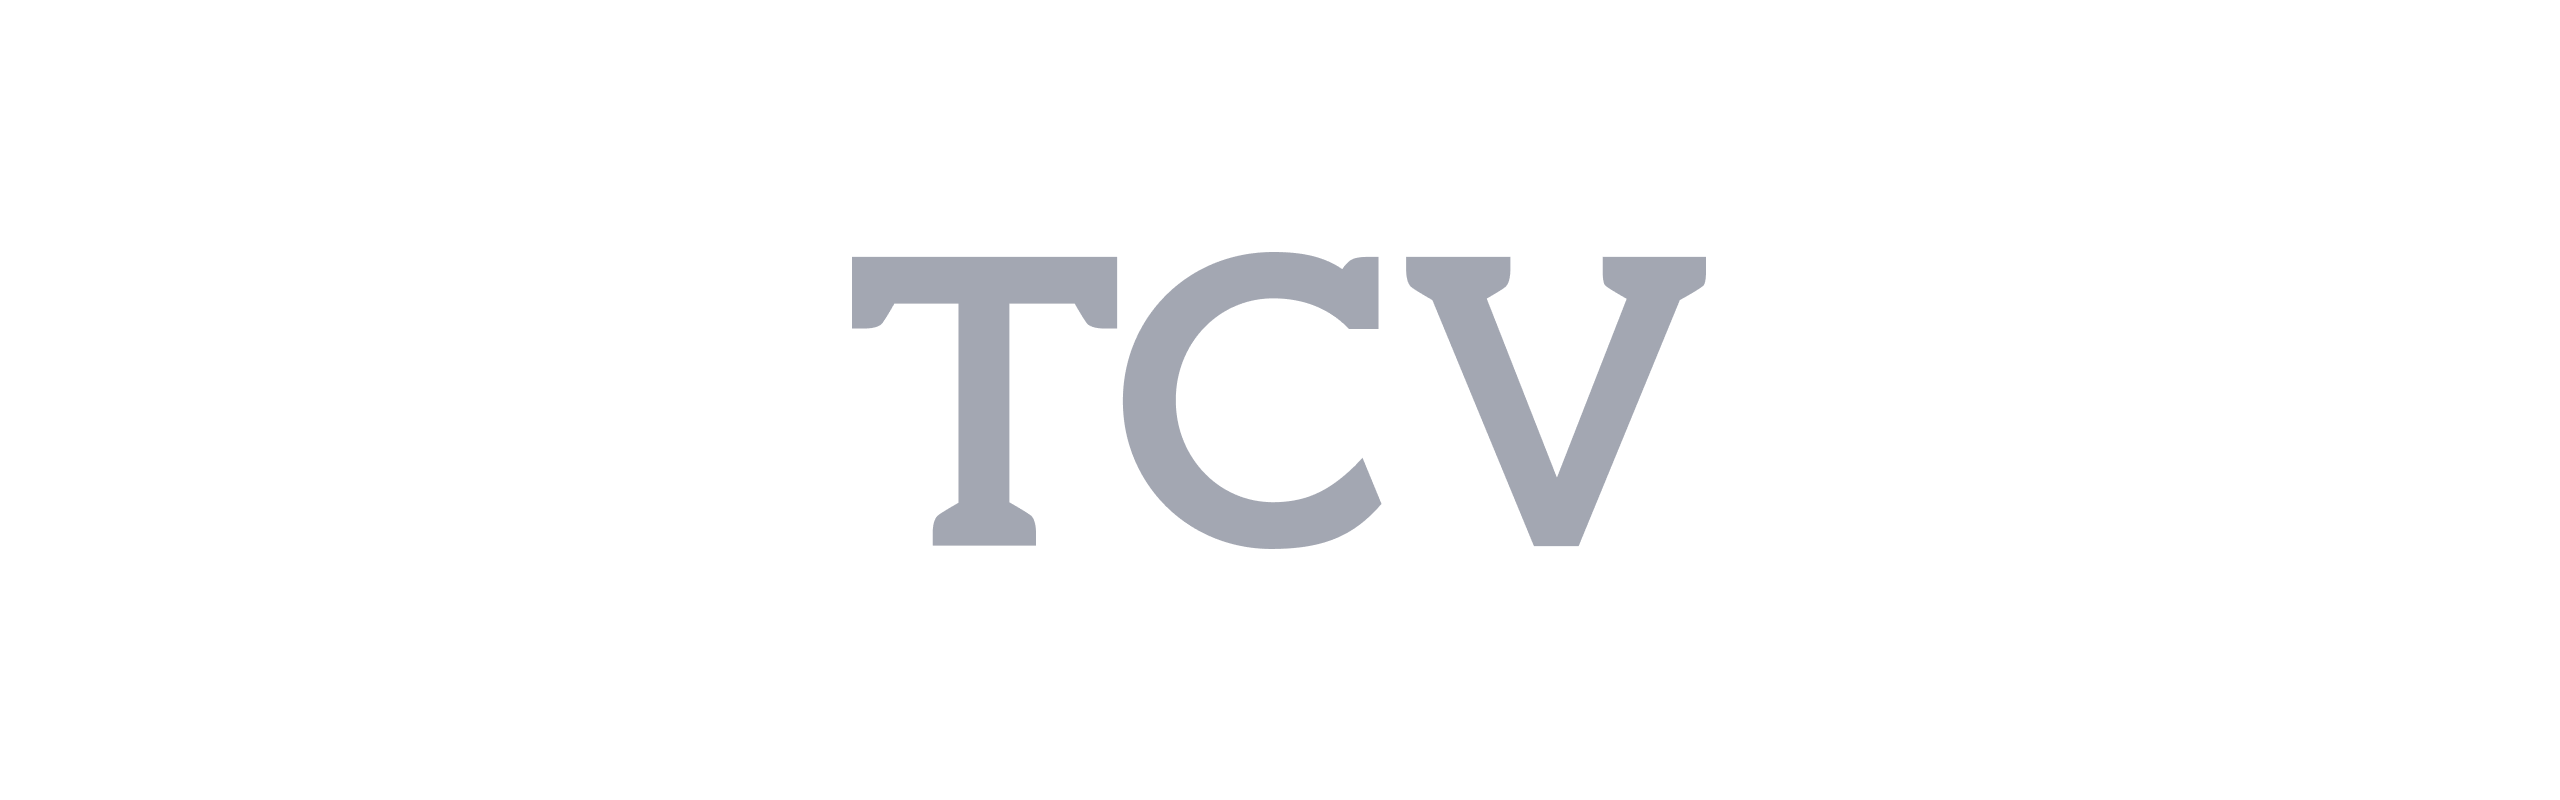 Technology & product due diligence | Code & Co. advises TCV (logo shown)